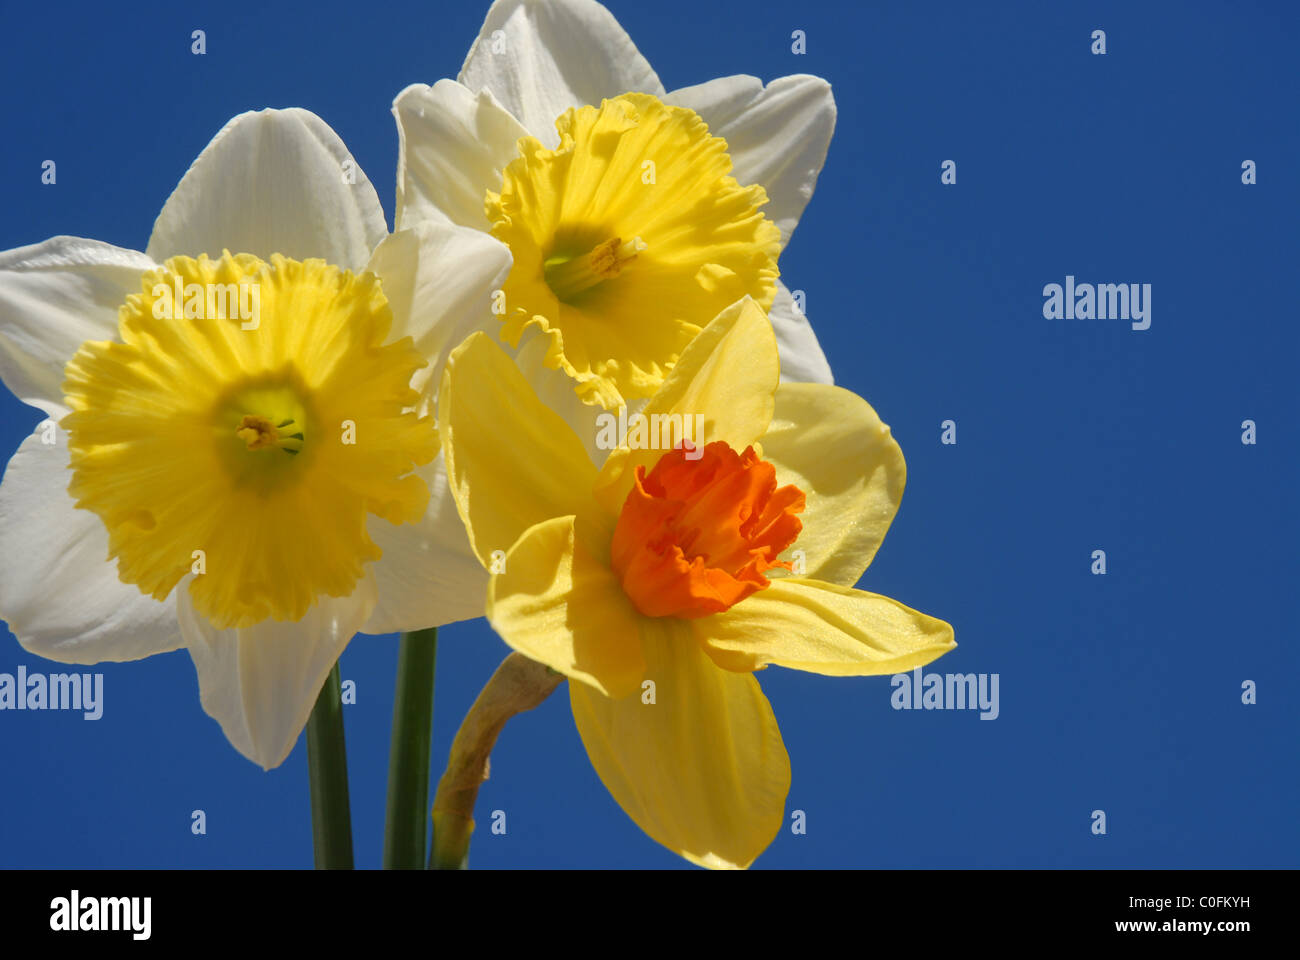 Daffodils against blue sky Stock Photo